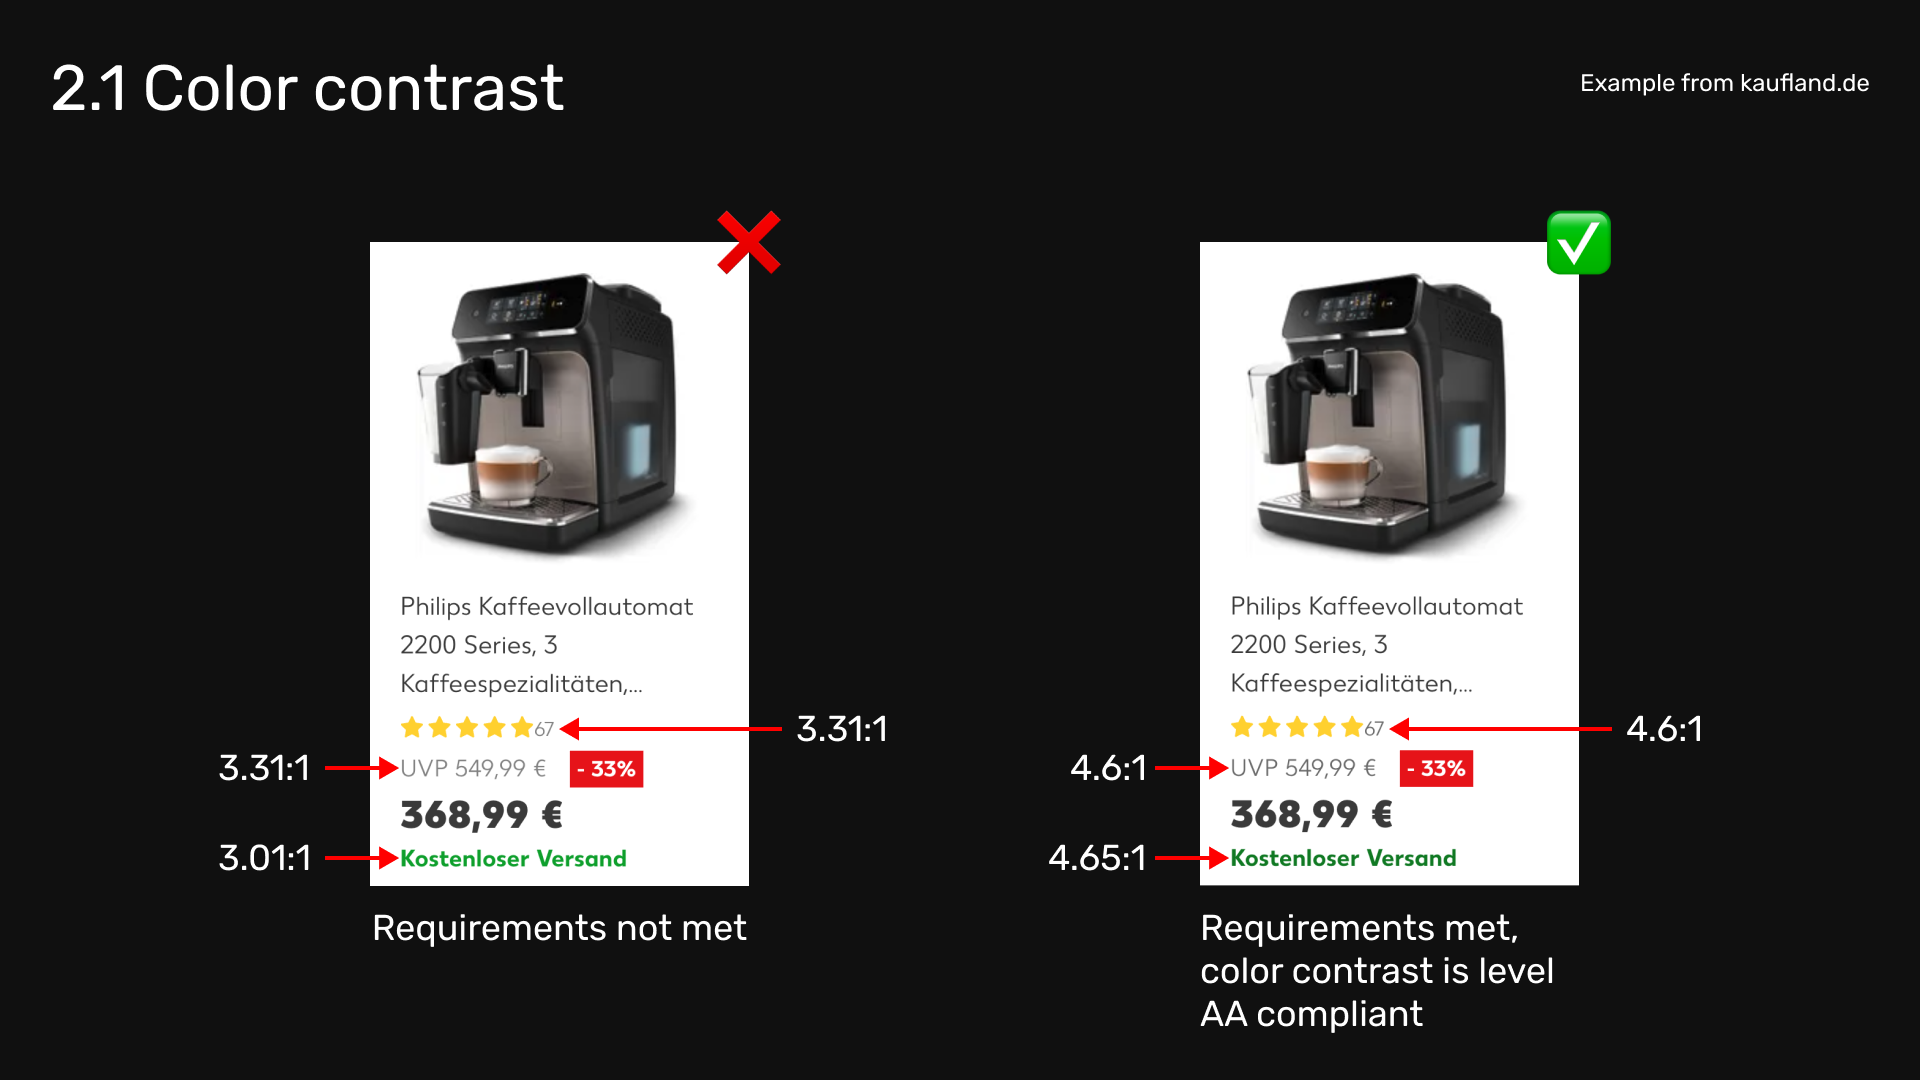 Illustration showcasing the difference of color contrast for an item on the Kaufland website. There are two images, both showing the contrast ratio. The first one has insufficient color contrast, showing values of 3.31:1 and 3.01:1. The second one is were requirements are met, with ratios of 4.6:1 and 4.65:1.